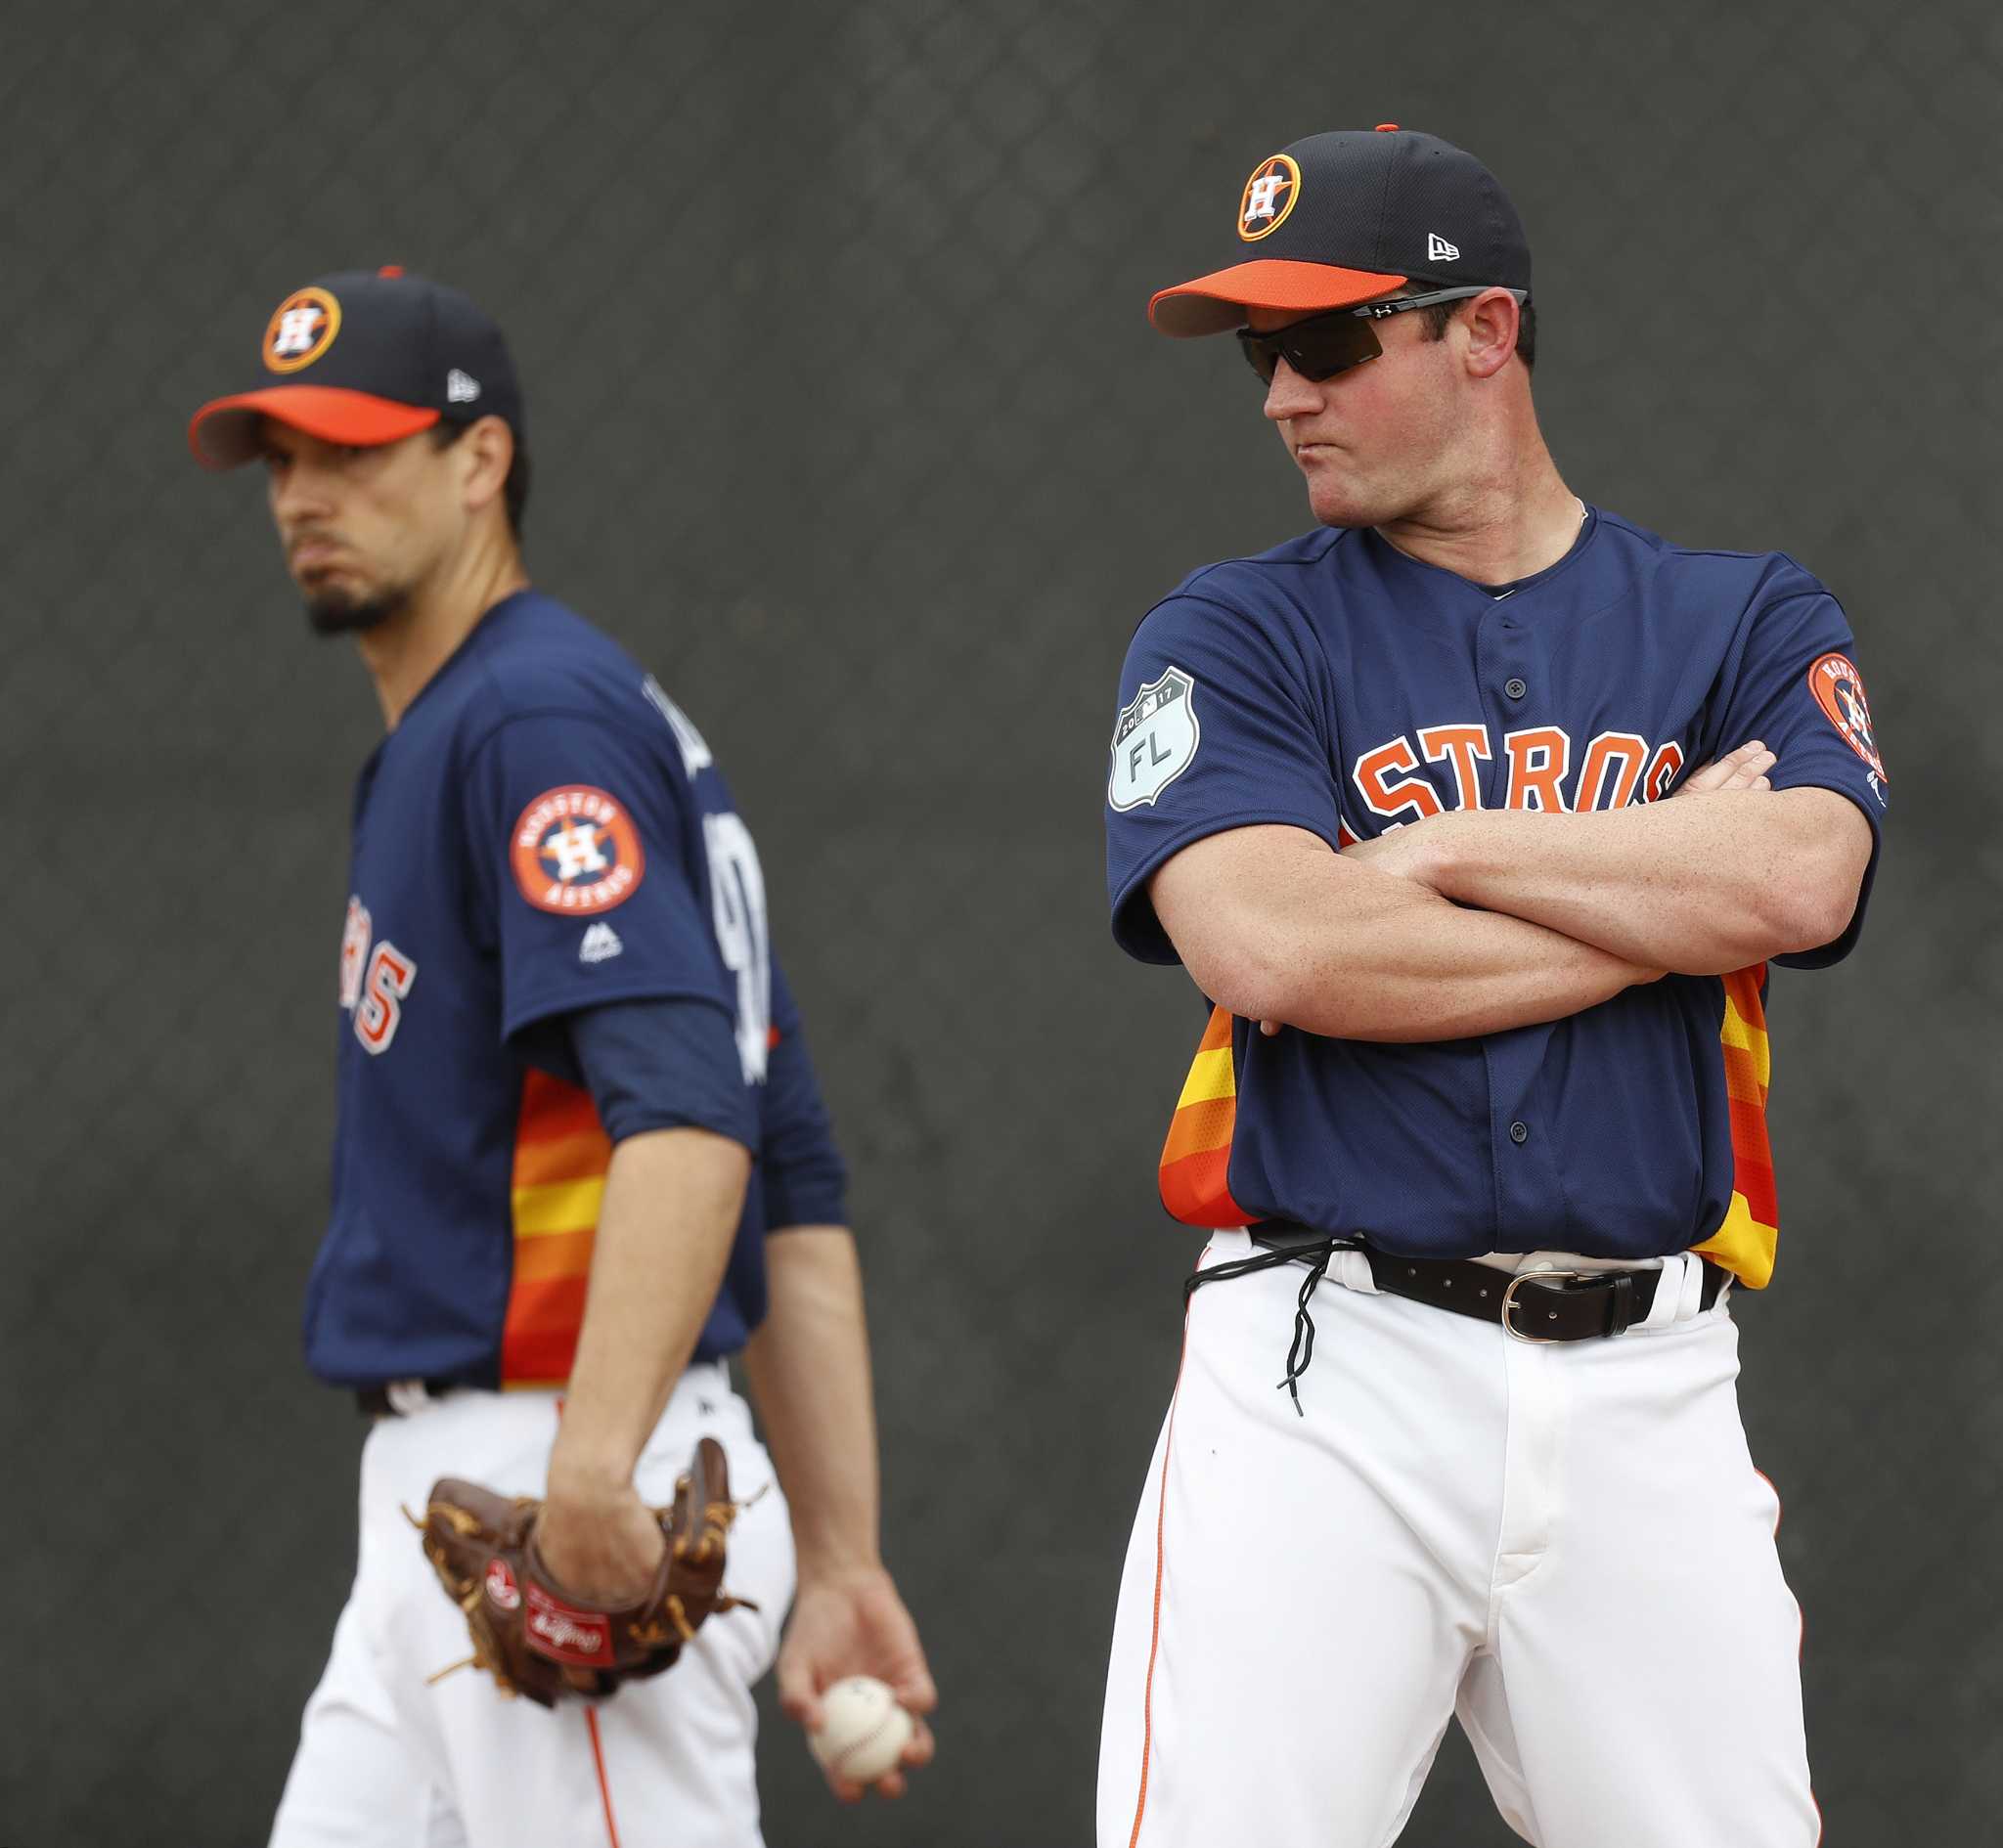 Roy Oswalt to visit Astros as guest instructor